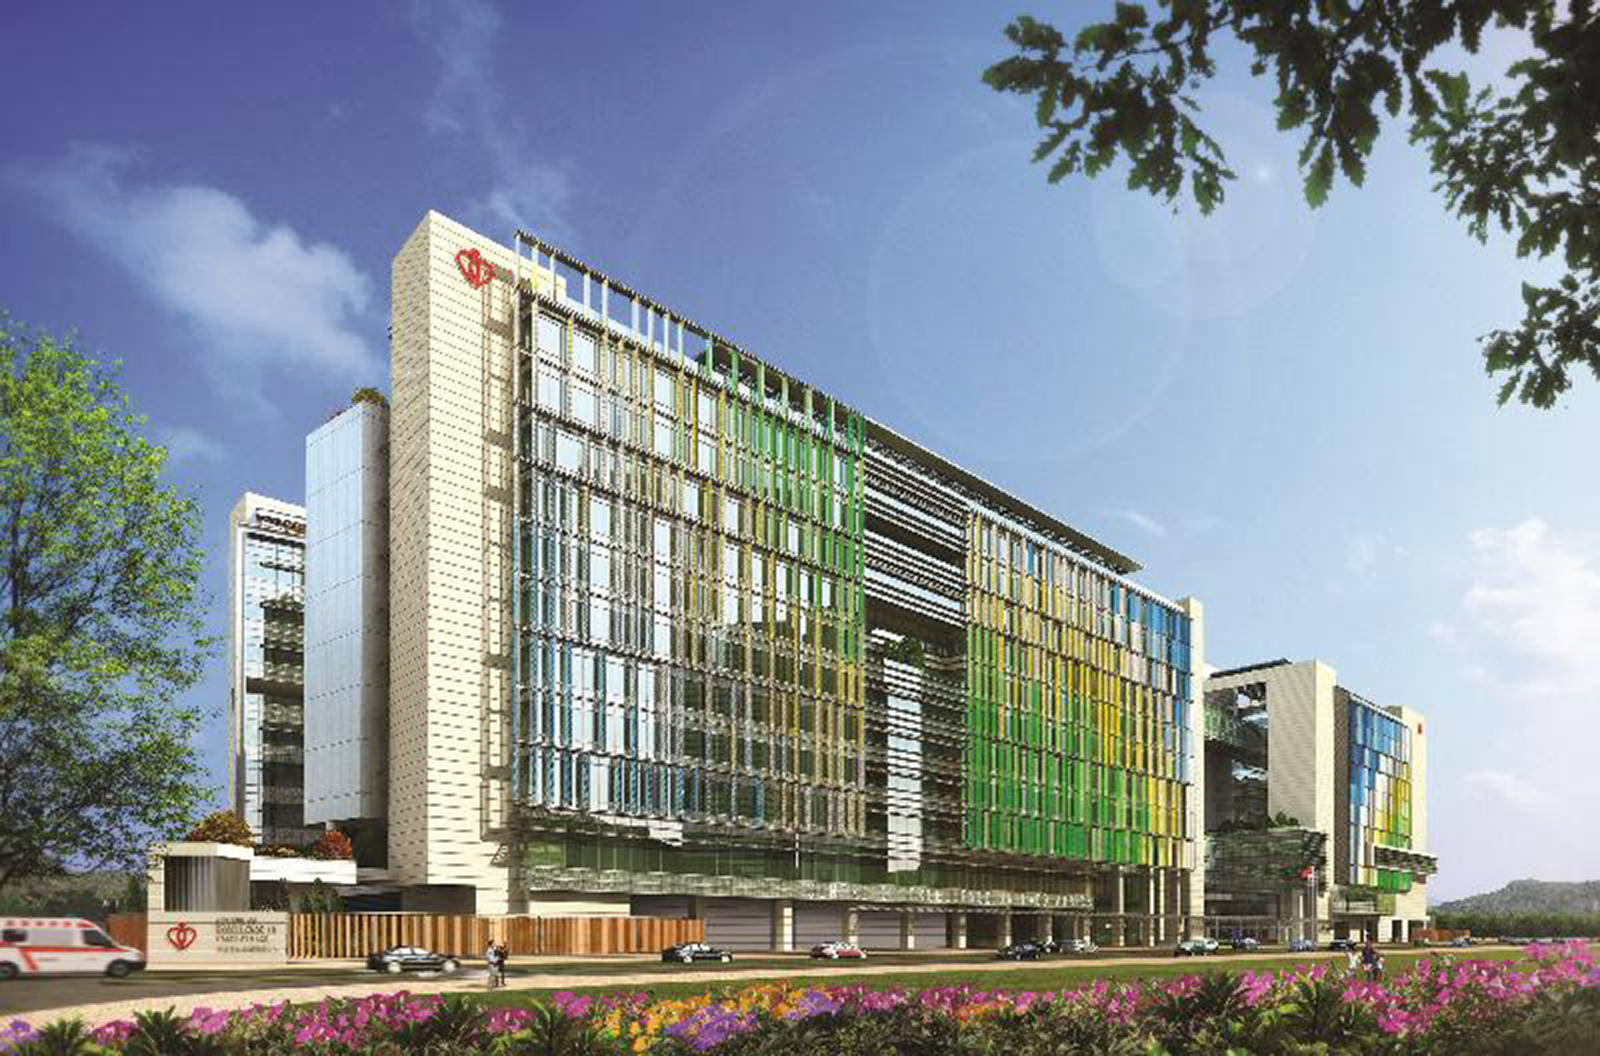 An artist's impression of the Children's Hospital. Photo: SCMP Pictures